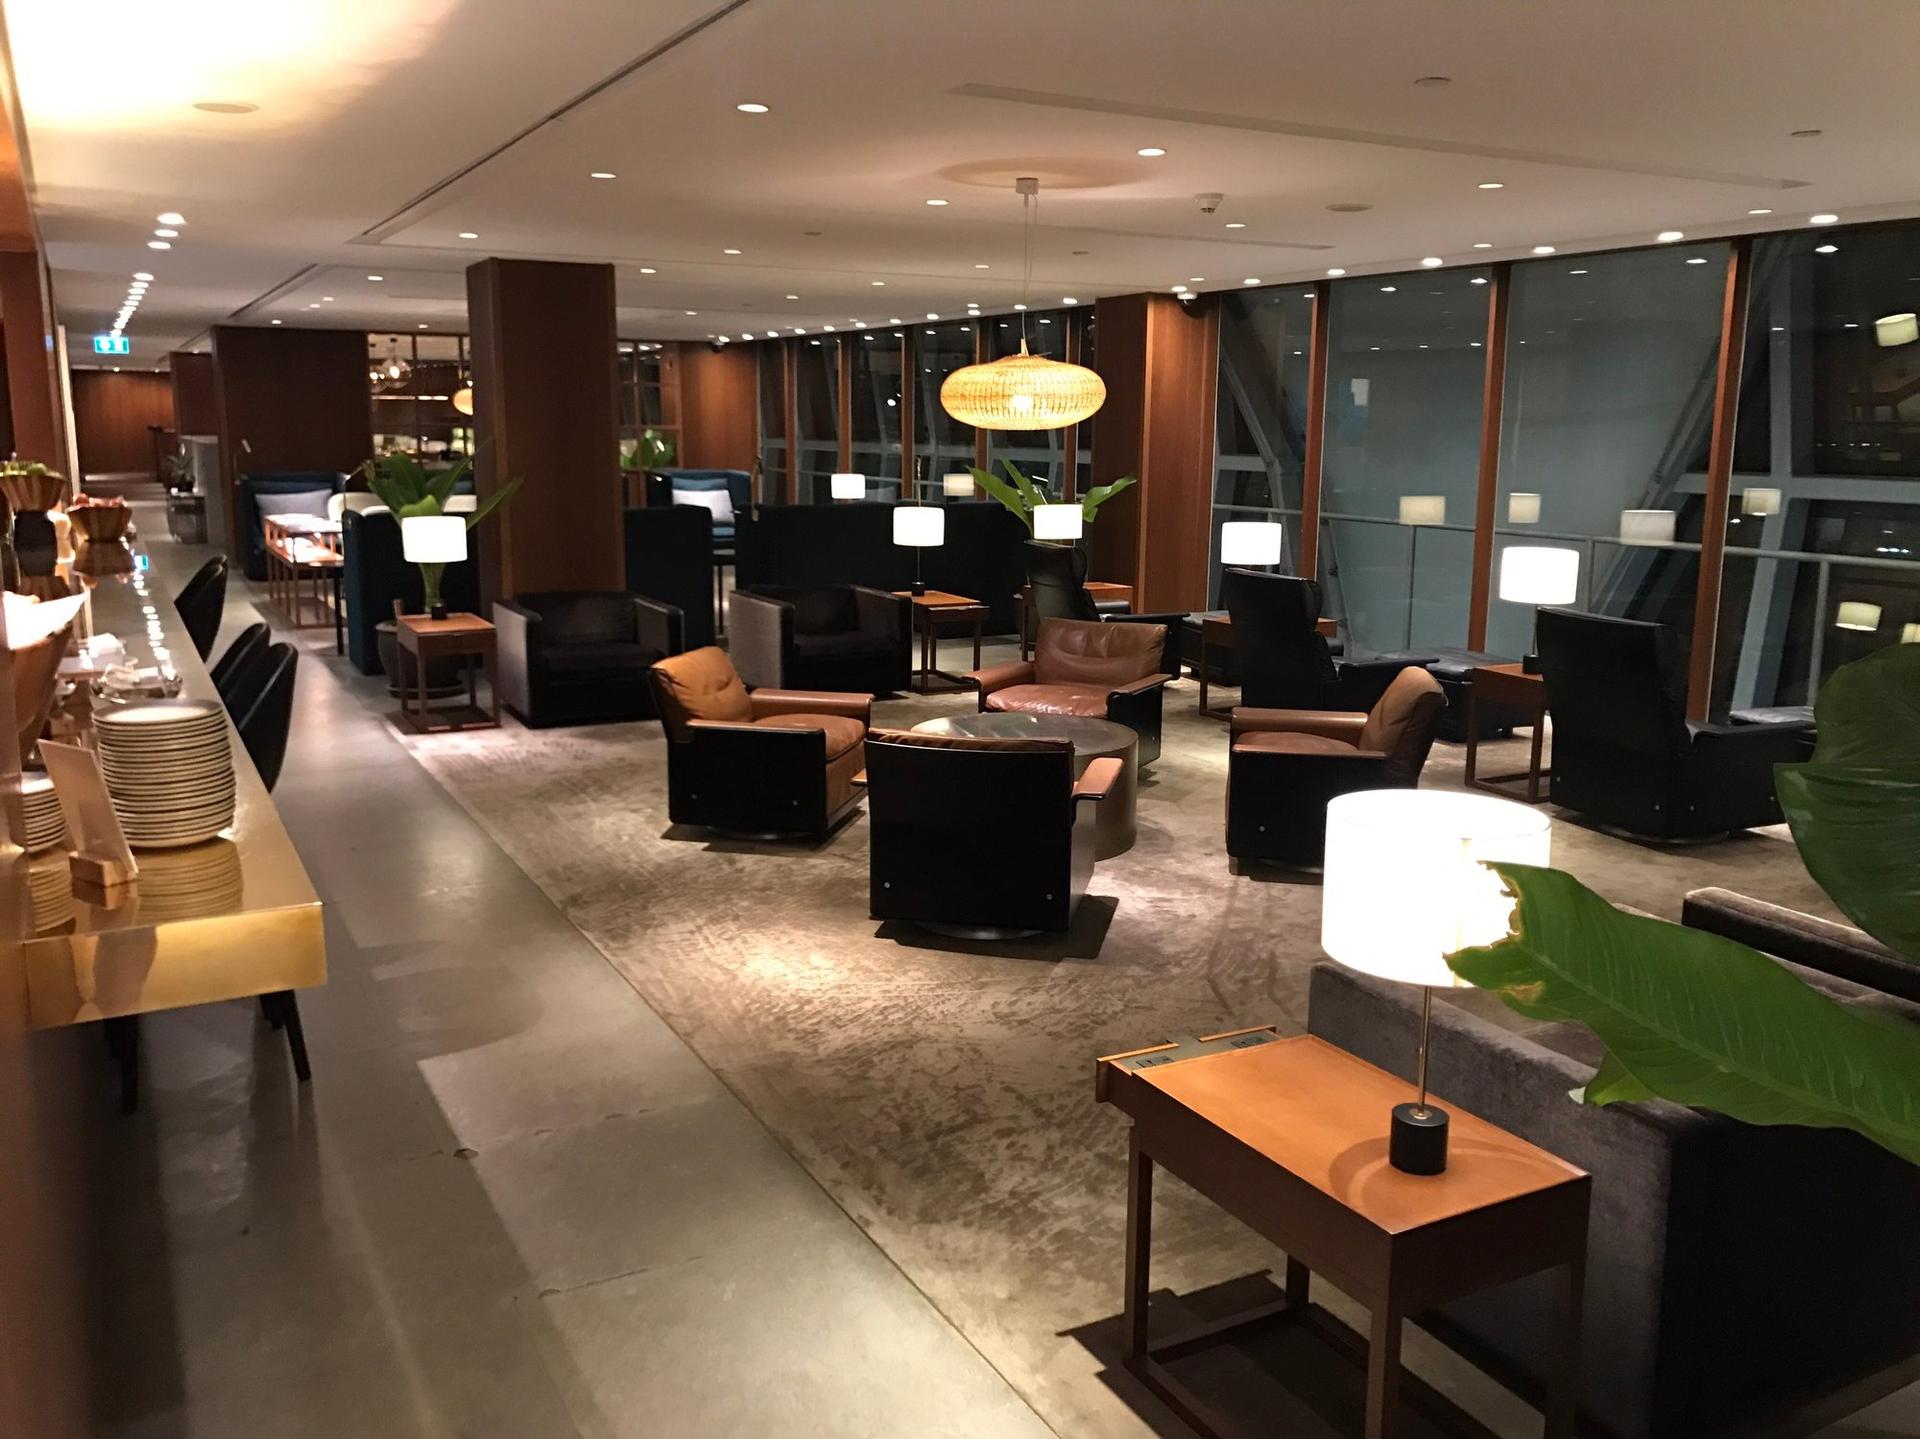 Cathay Pacific First and Business Class Lounge image 27 of 69